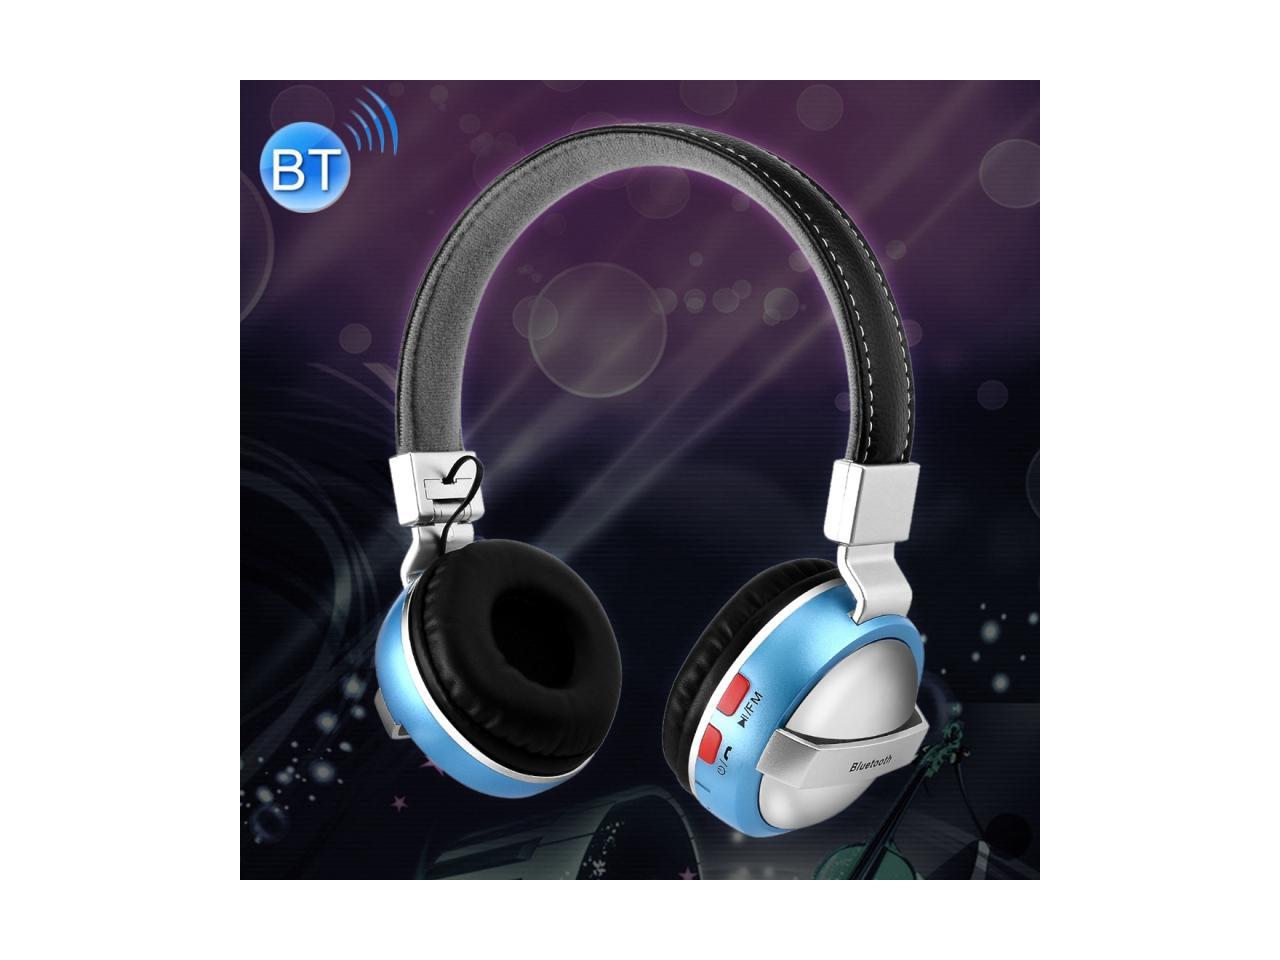 BTH-868 Stereo Sound Quality V4.2 Bluetooth Headphone, Bluetooth Distance: 10m, Support 3.5mm Audio Input & FM, for iPhone, Samsung, HTC, Sony and other Smartphones (blue)